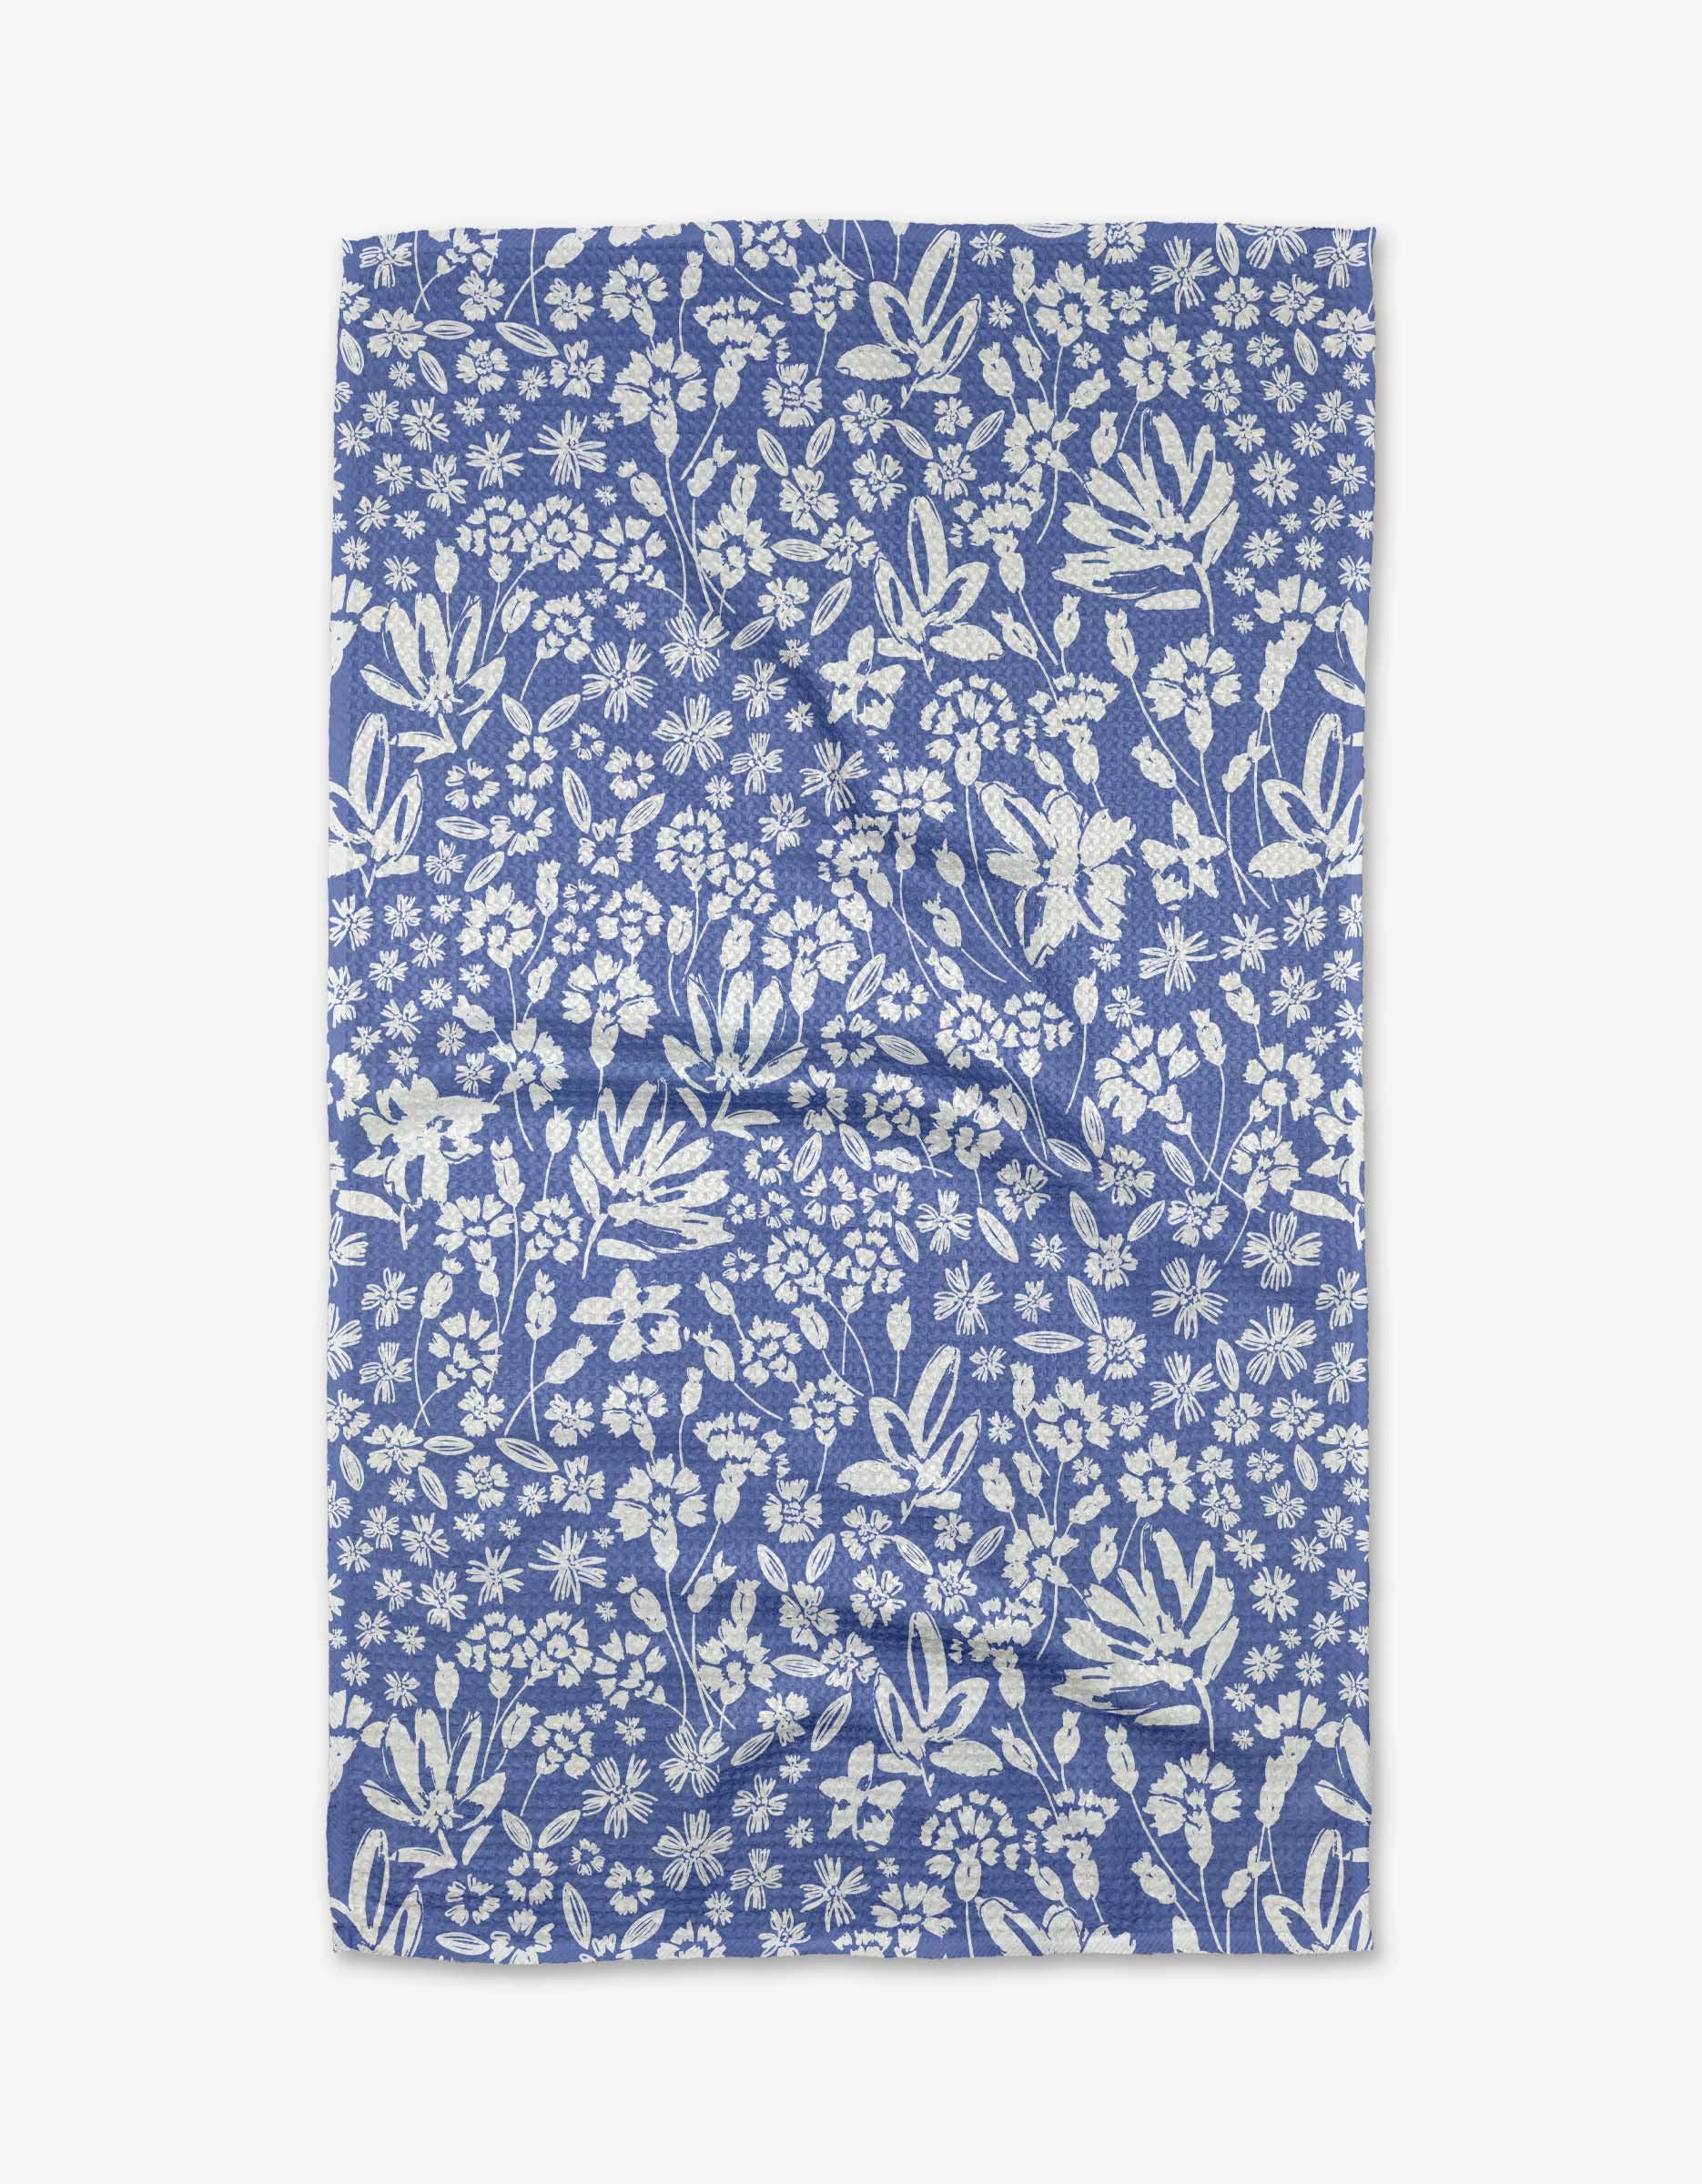 Bloom Me Over Floral Tea Towel by Geometry. Tea Towel has a white floral print on a blie background.